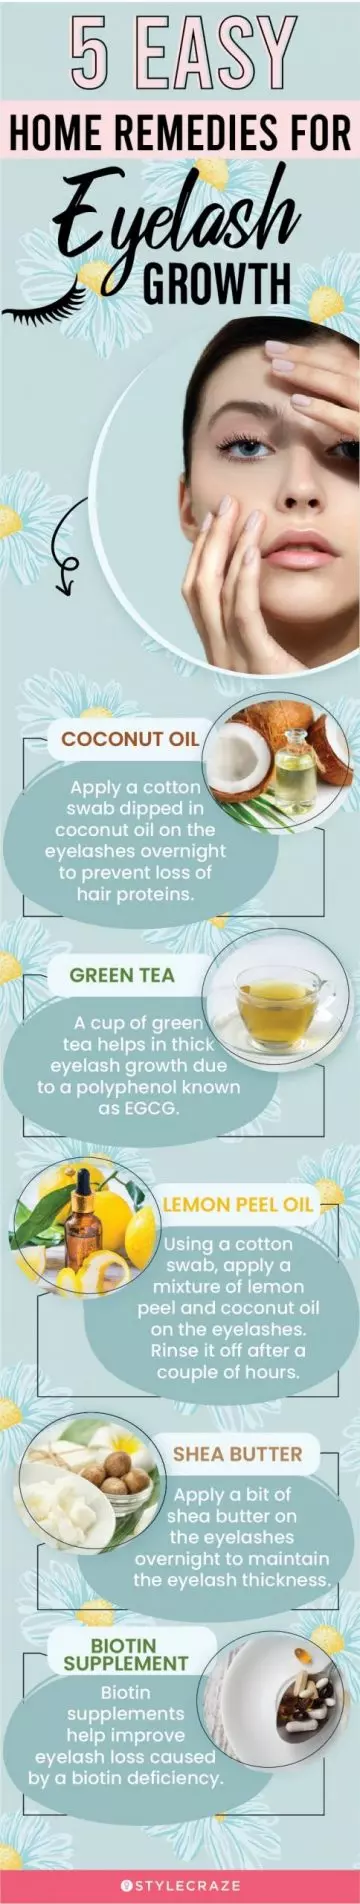 5 easy home remedies for eyelash growth (infographic)